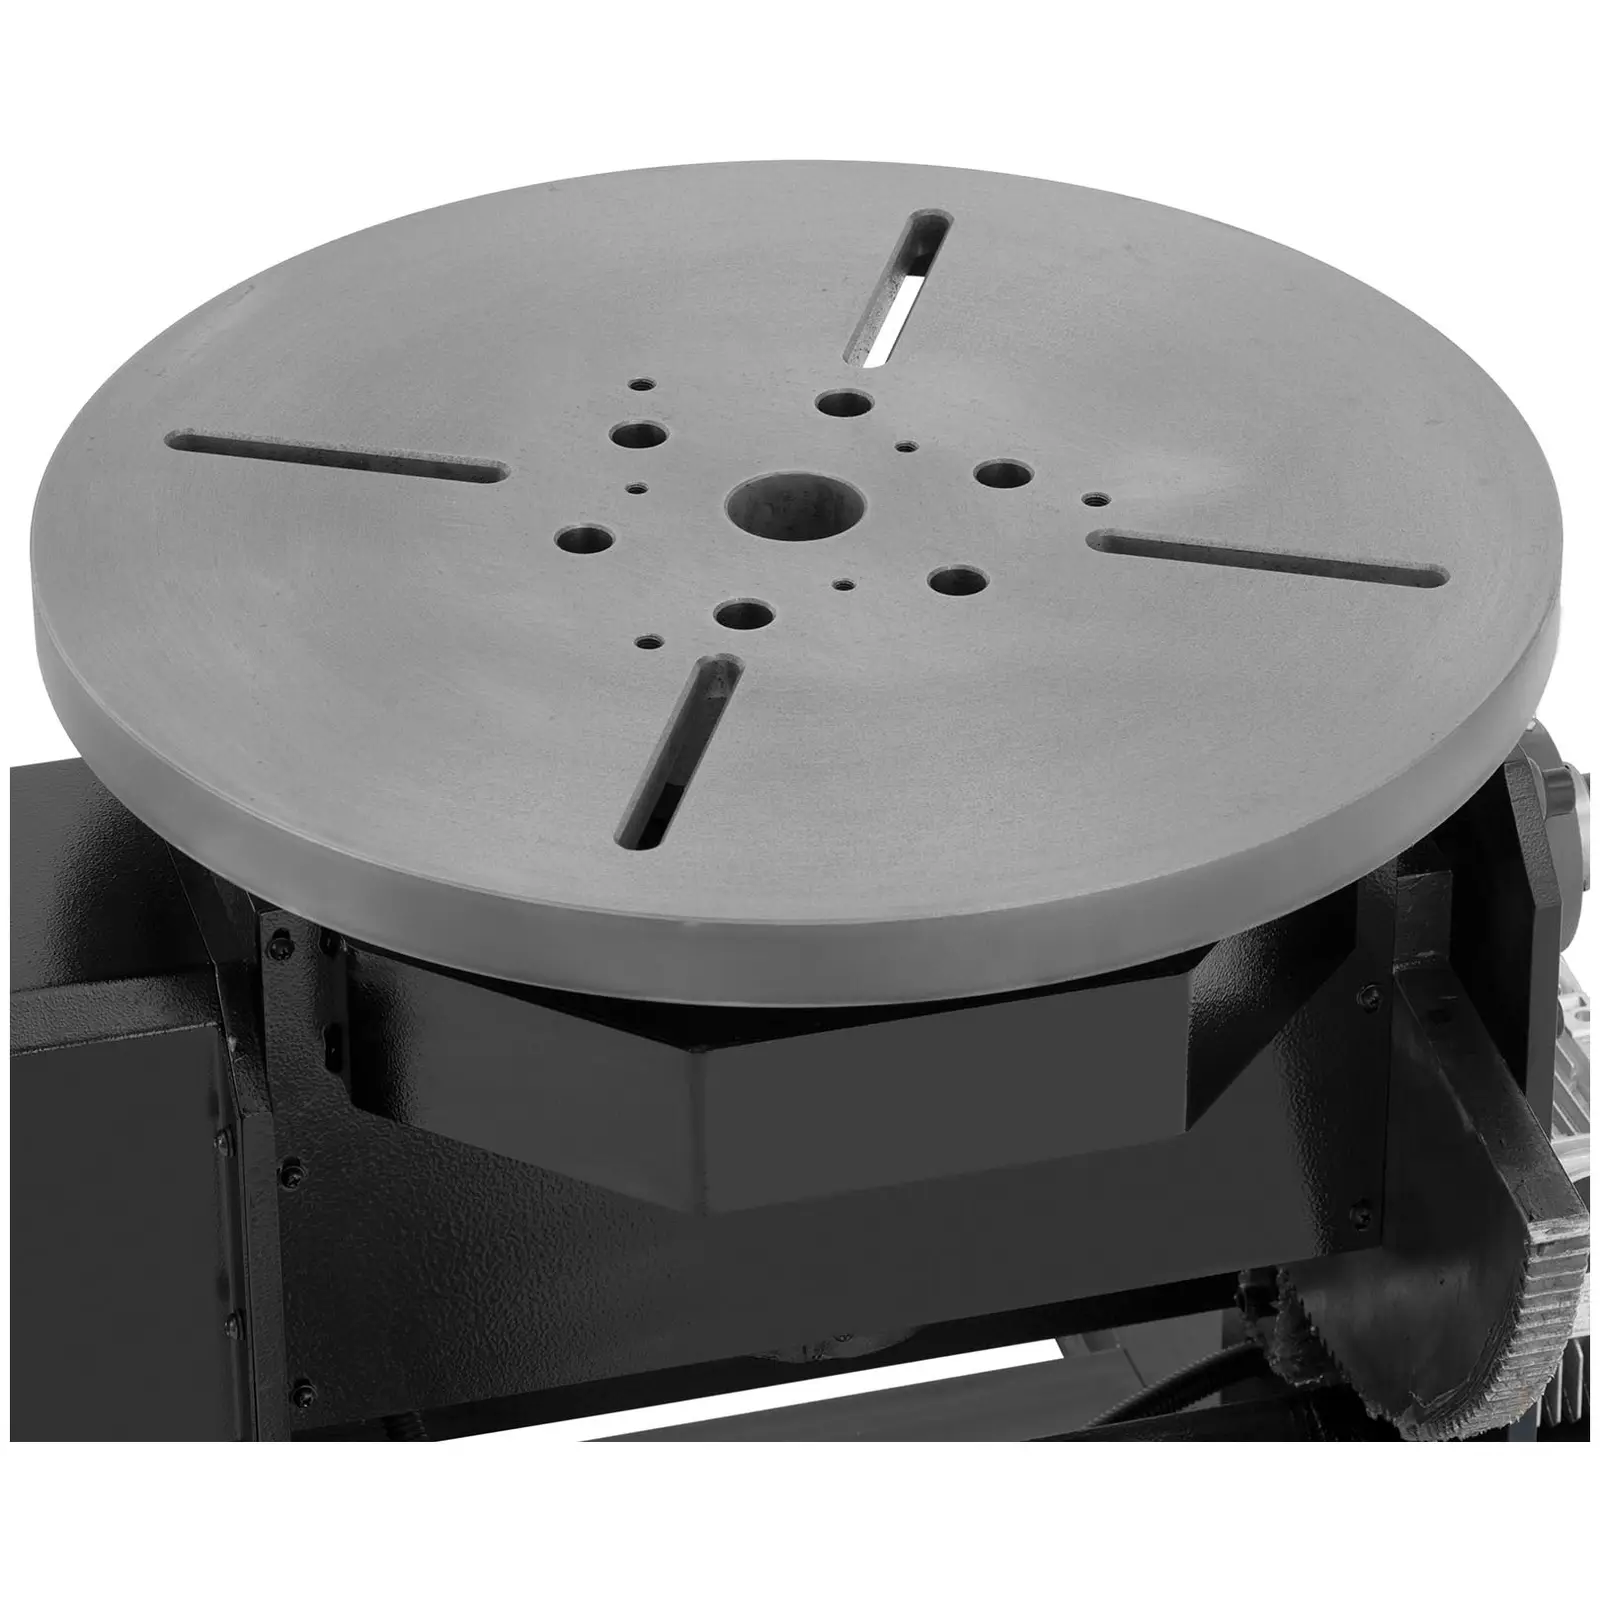 Welding Turntable - 500 kg - table inclination -45° - 90° - foot pedal